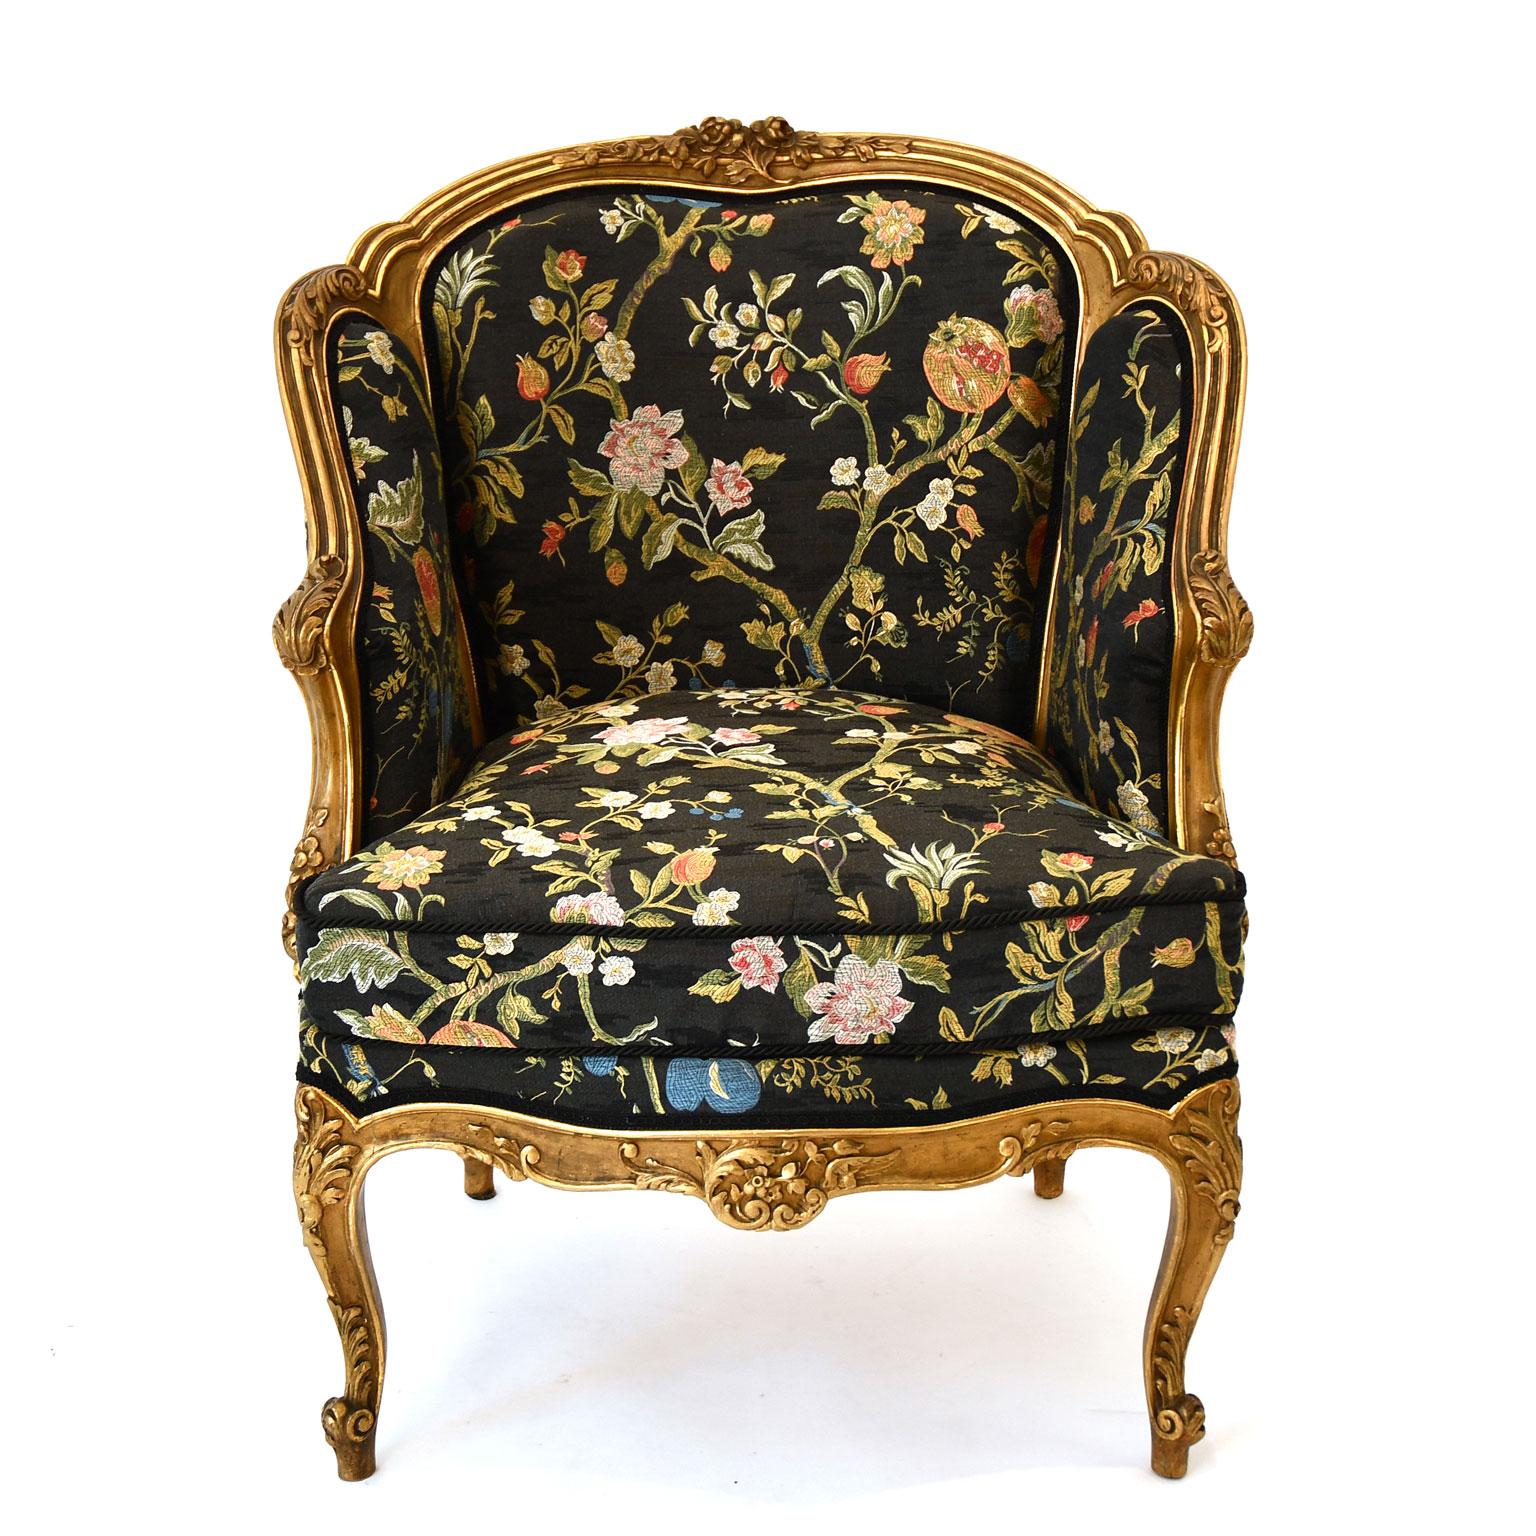 Armchair by Friedrich Otto Schmidt, the famous Viennese workshop which made also some items for the Wiener Werkstatte.
The chair was made between 1880 - 1920. Wooden frame, lacquered in gold. We partly renew the colour. New upholstery and flower